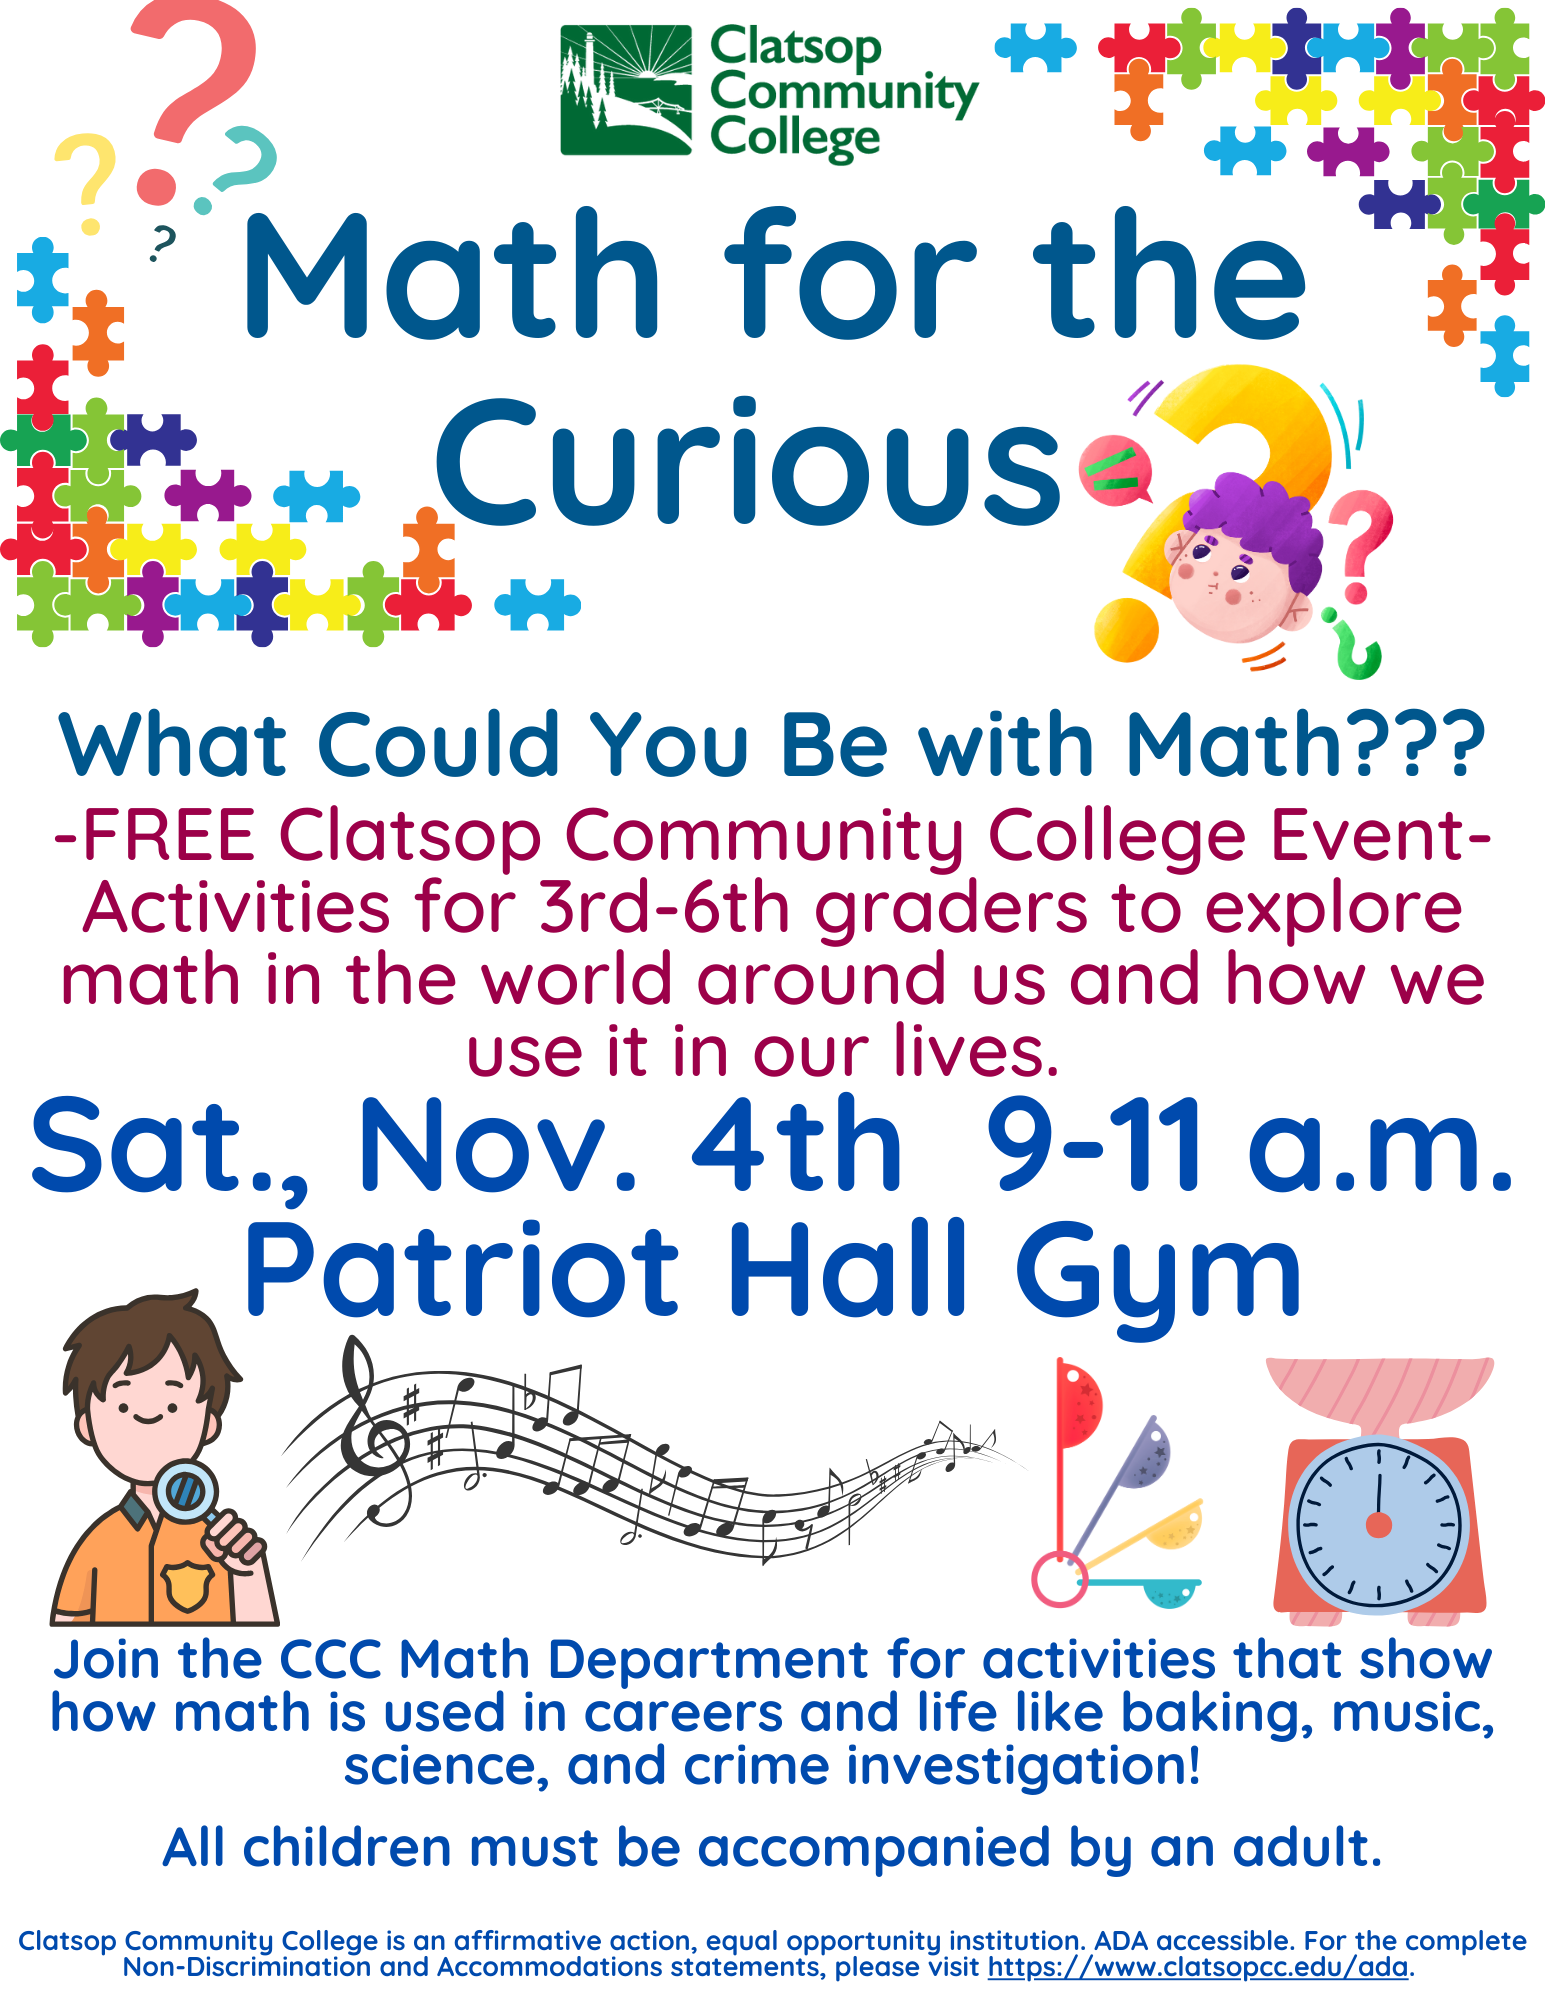 Math for the Curious flyer with event information